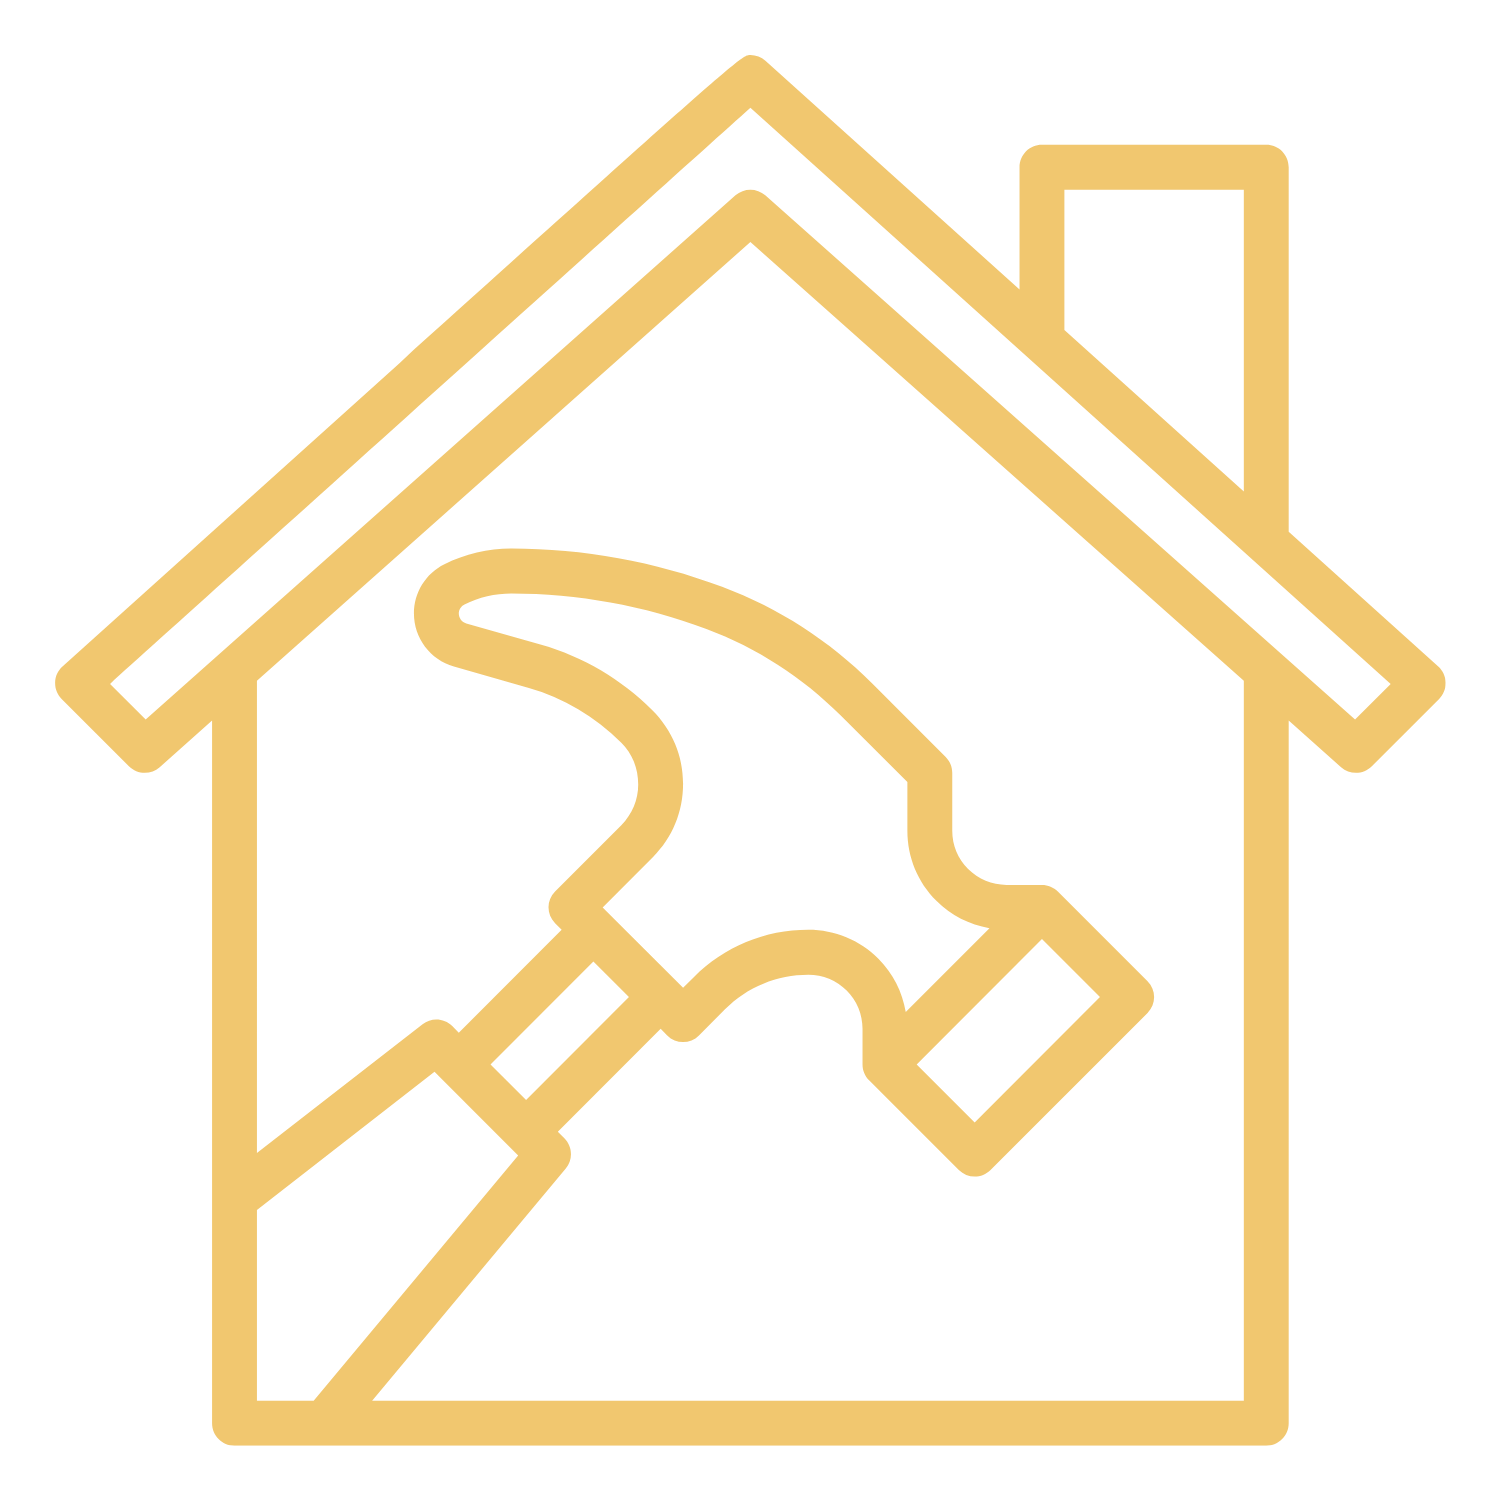 new full home remodeling icon